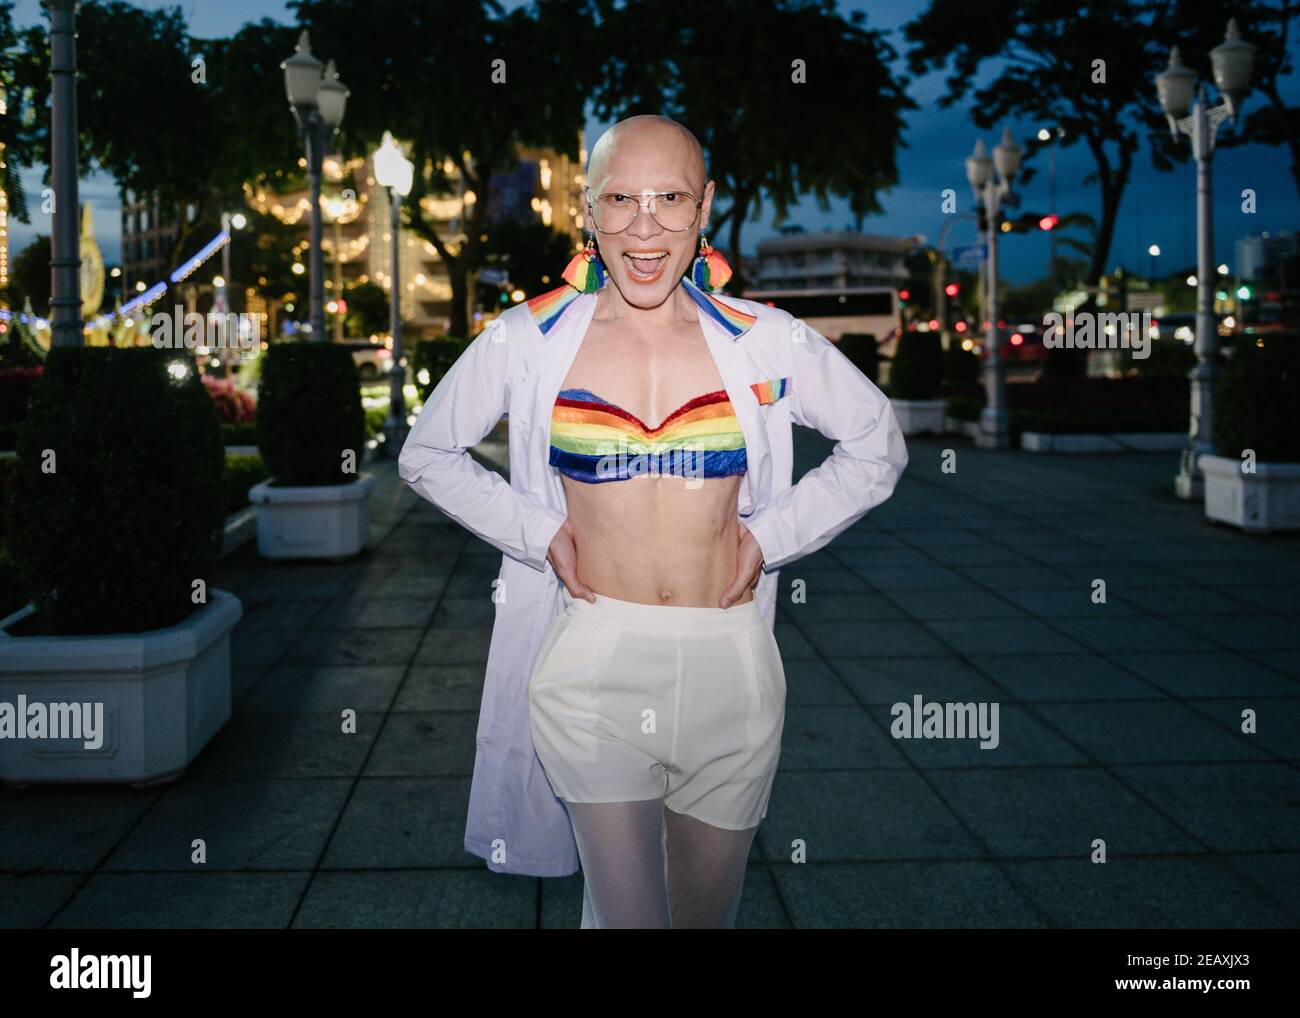 An Asian Queer person wearing a medical doctor white uniform with rainbow colors items to protest against discrimination of LGBTQ community members. Stock Photo